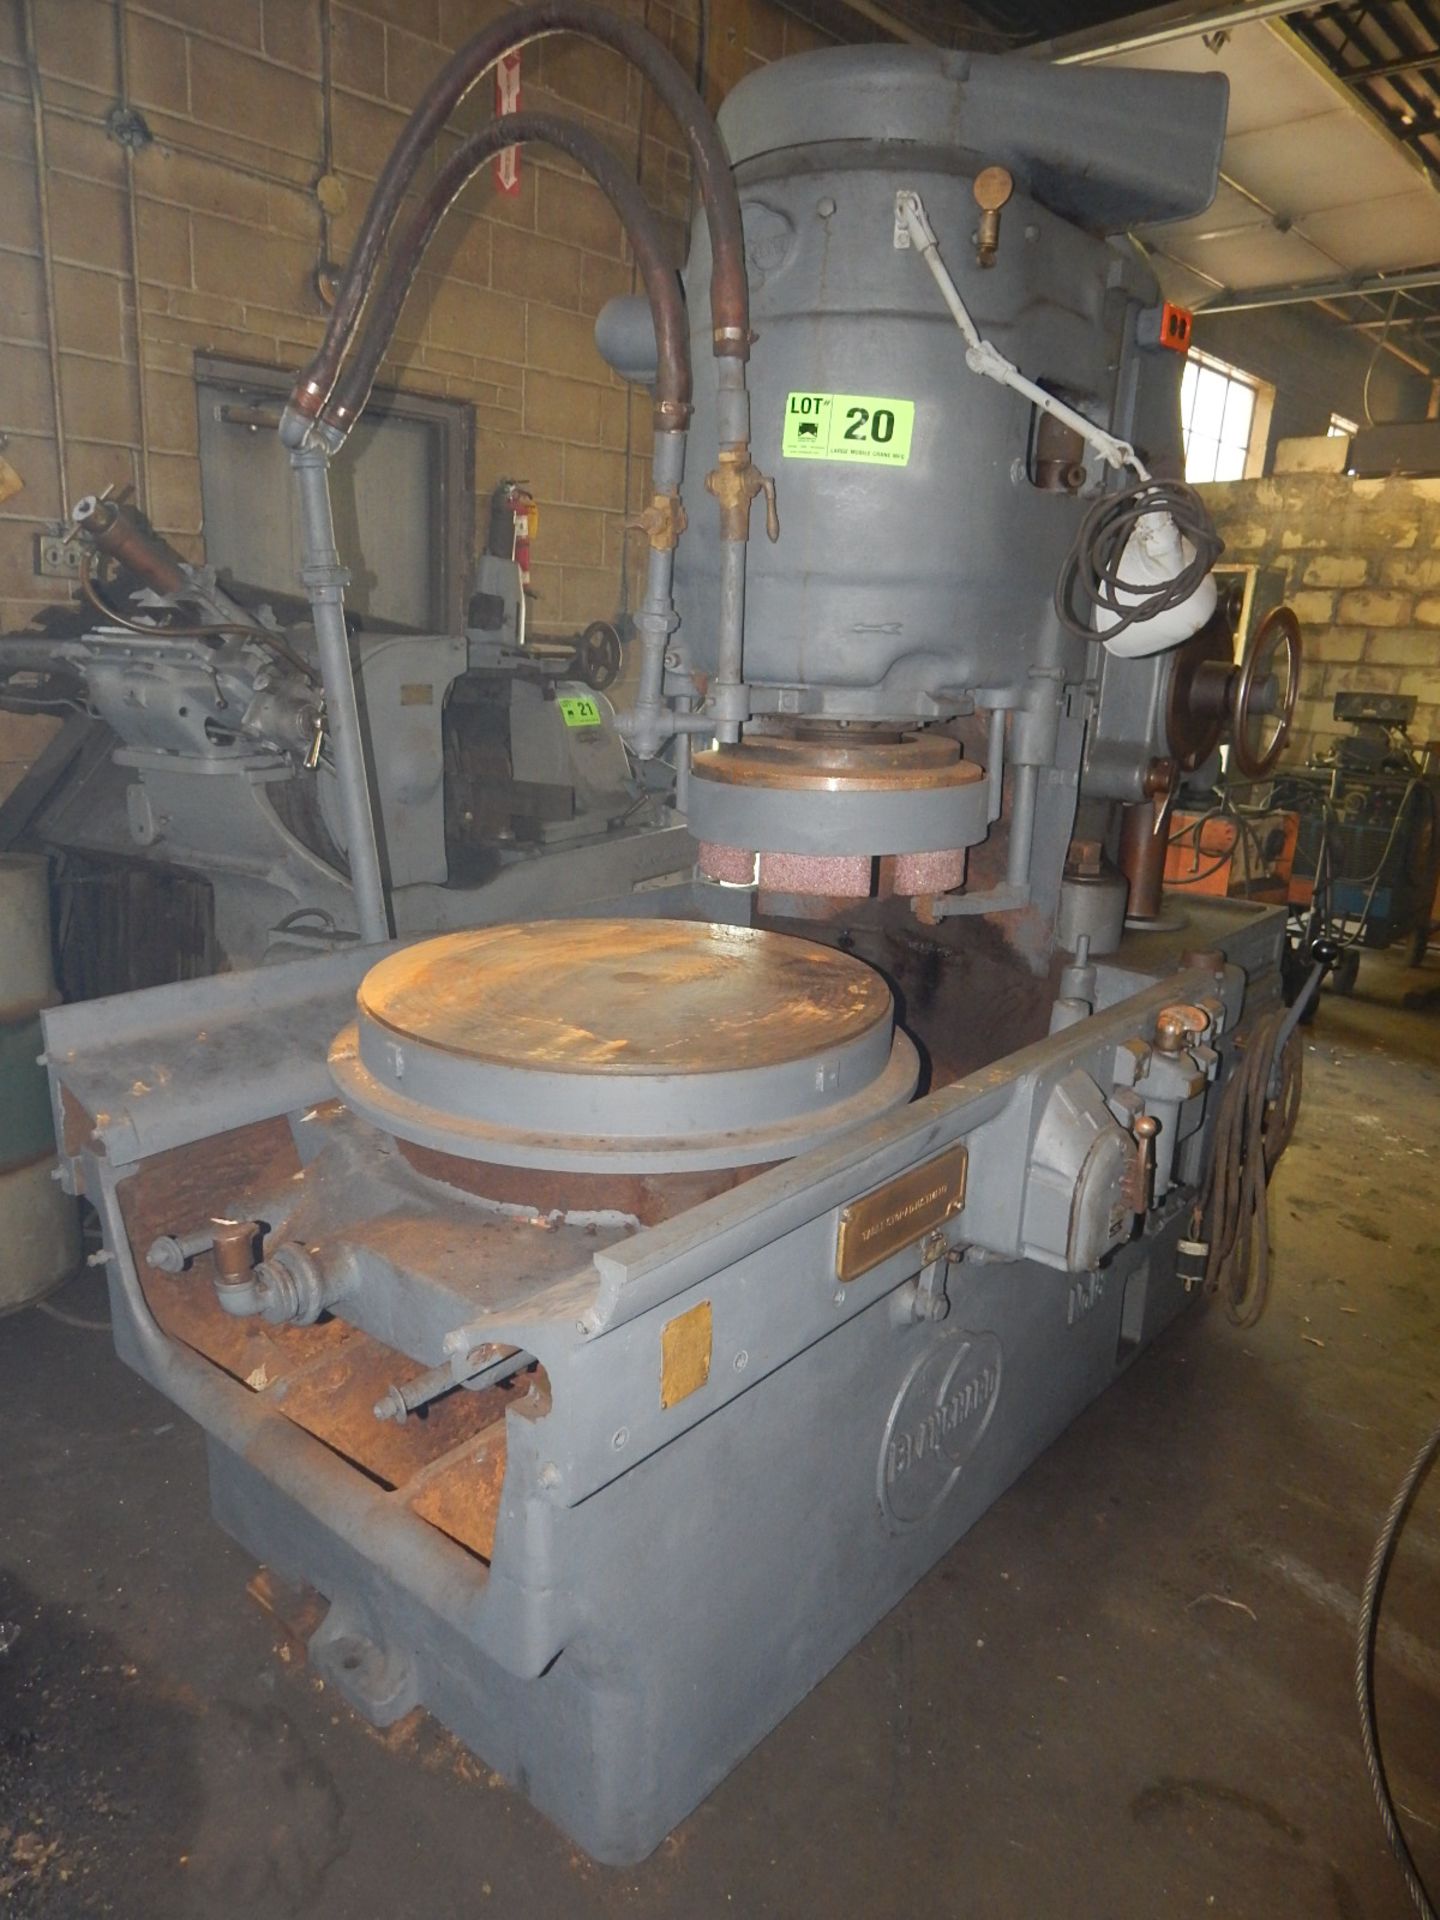 BLANCHARD NO. 18 ROTARY SURFACE GRINDER WITH 32" DIAMETER ELECTROMAGNETIC CHUCK, SPEEDS TO 720 - Image 2 of 5